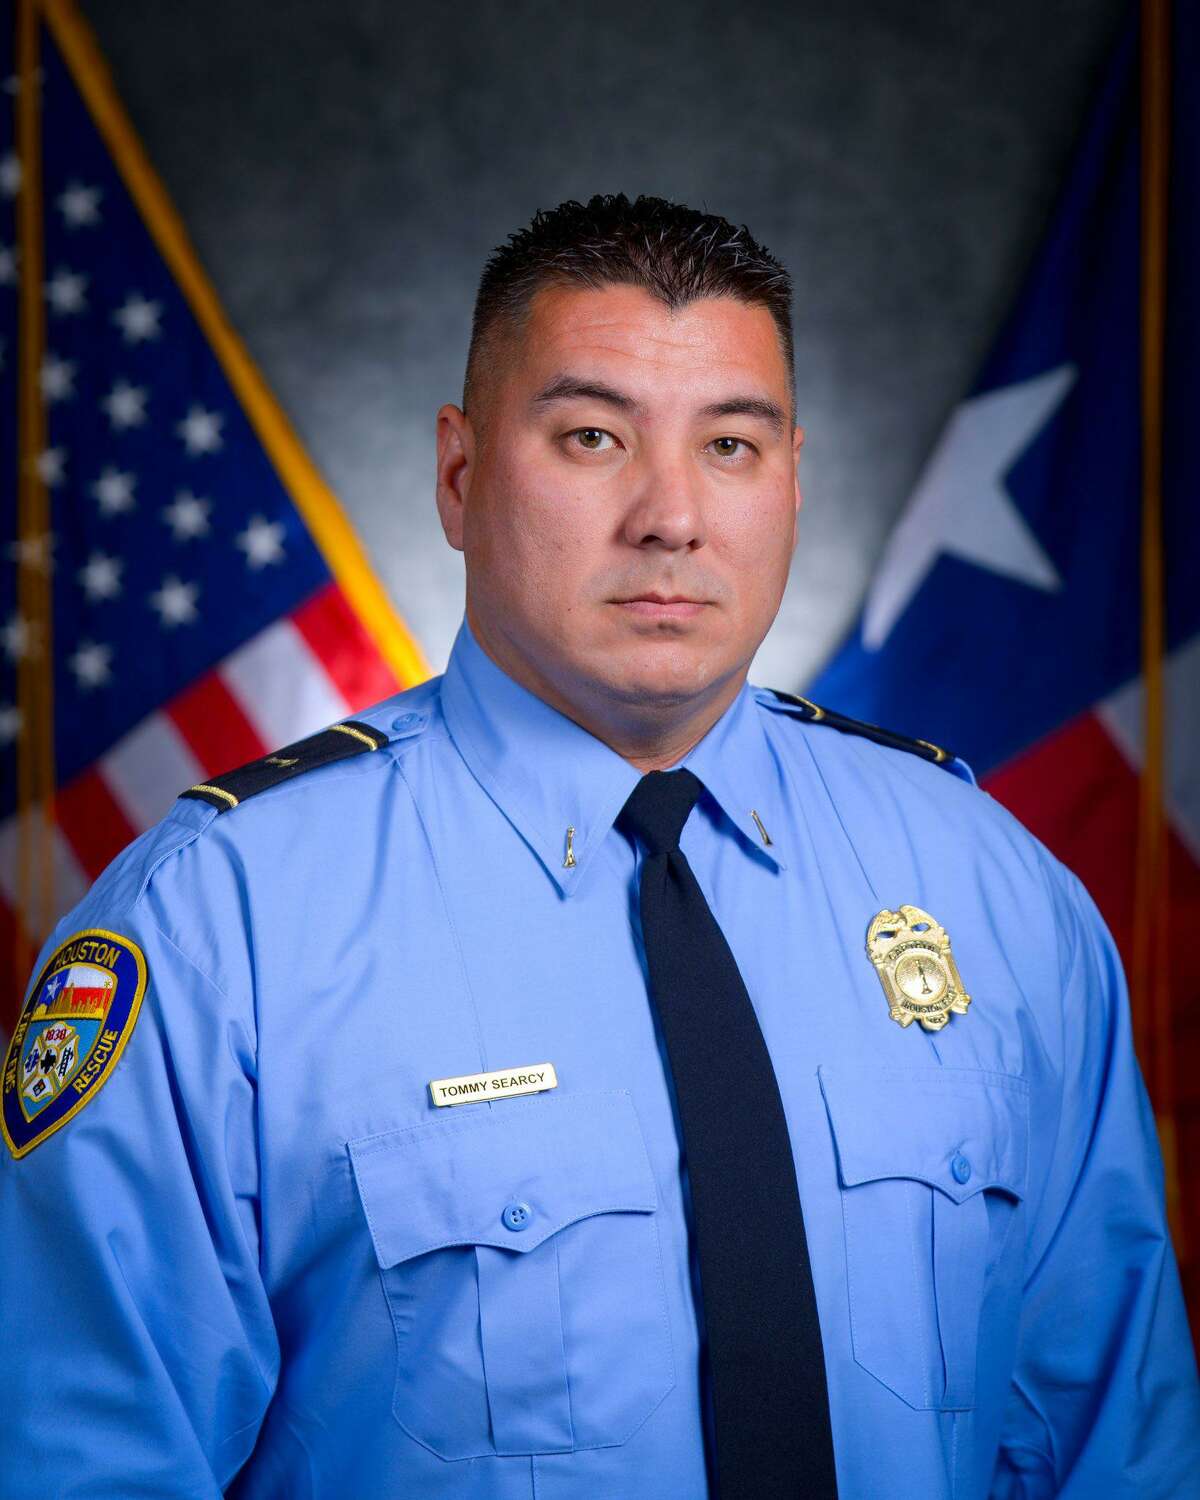 Houston Fire Department Capt. Tommy Searcy, 45, died Sept. 8 after a roughly month-long battle with COVID-19. The third Houston firefighter to die from the virus, Searcy's colleagues remembered him for his calm leadership style and friendly demeanor in the station.